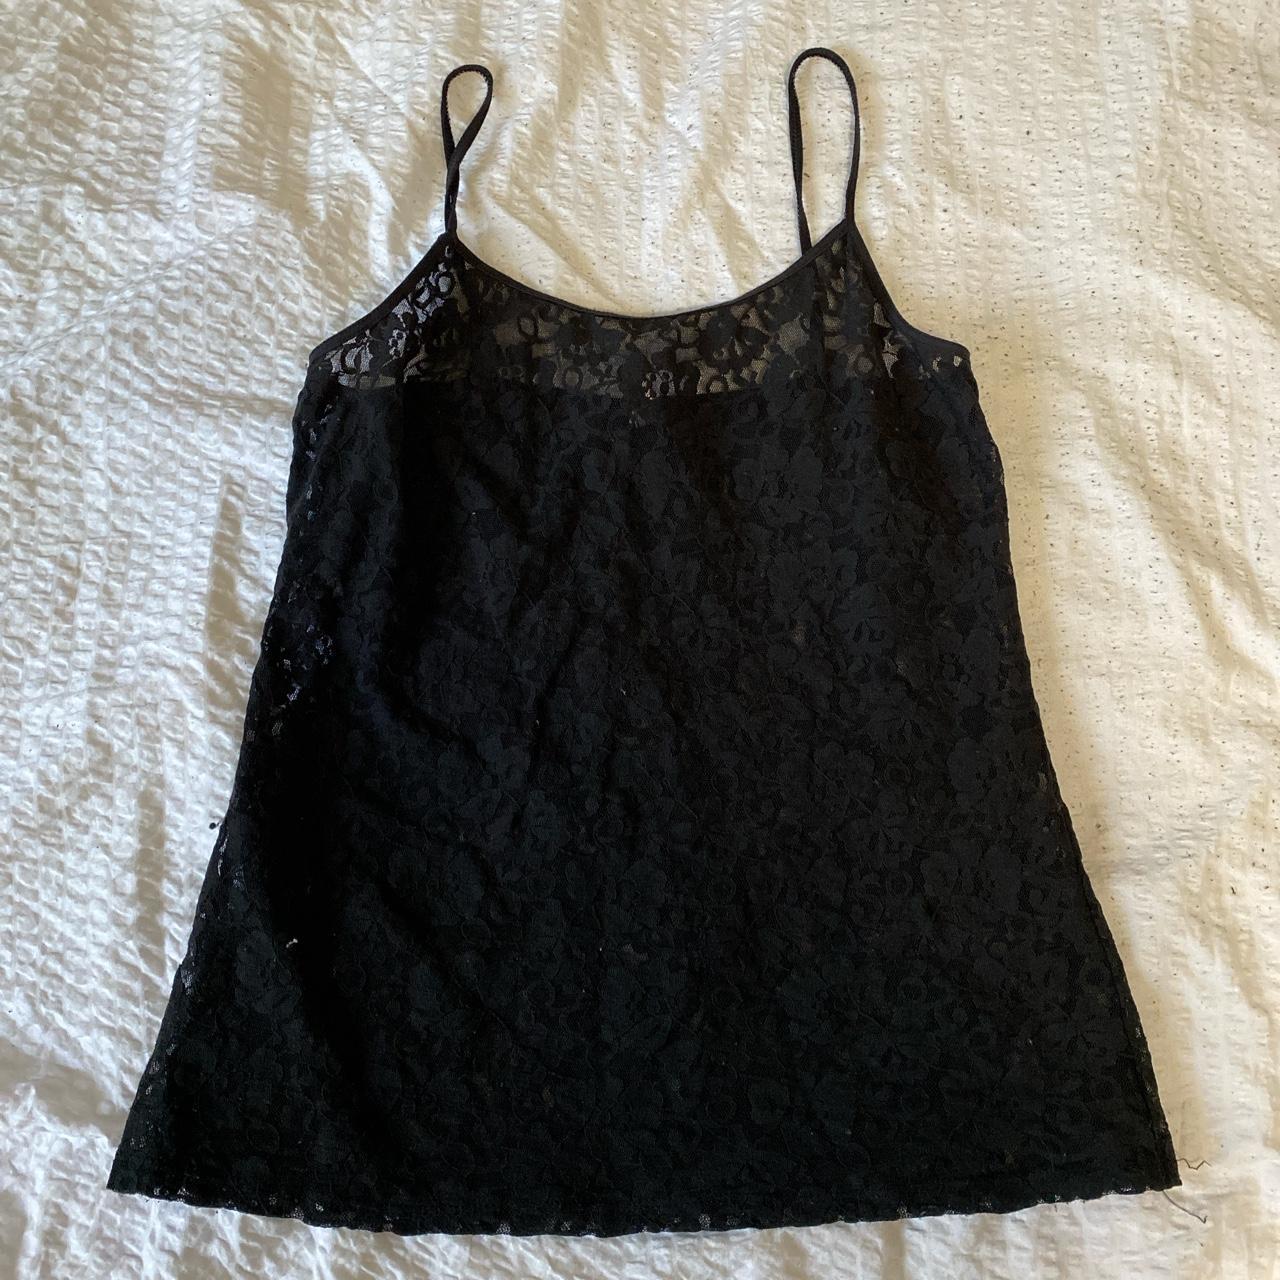 Lace Cami • completely see through • great for... - Depop